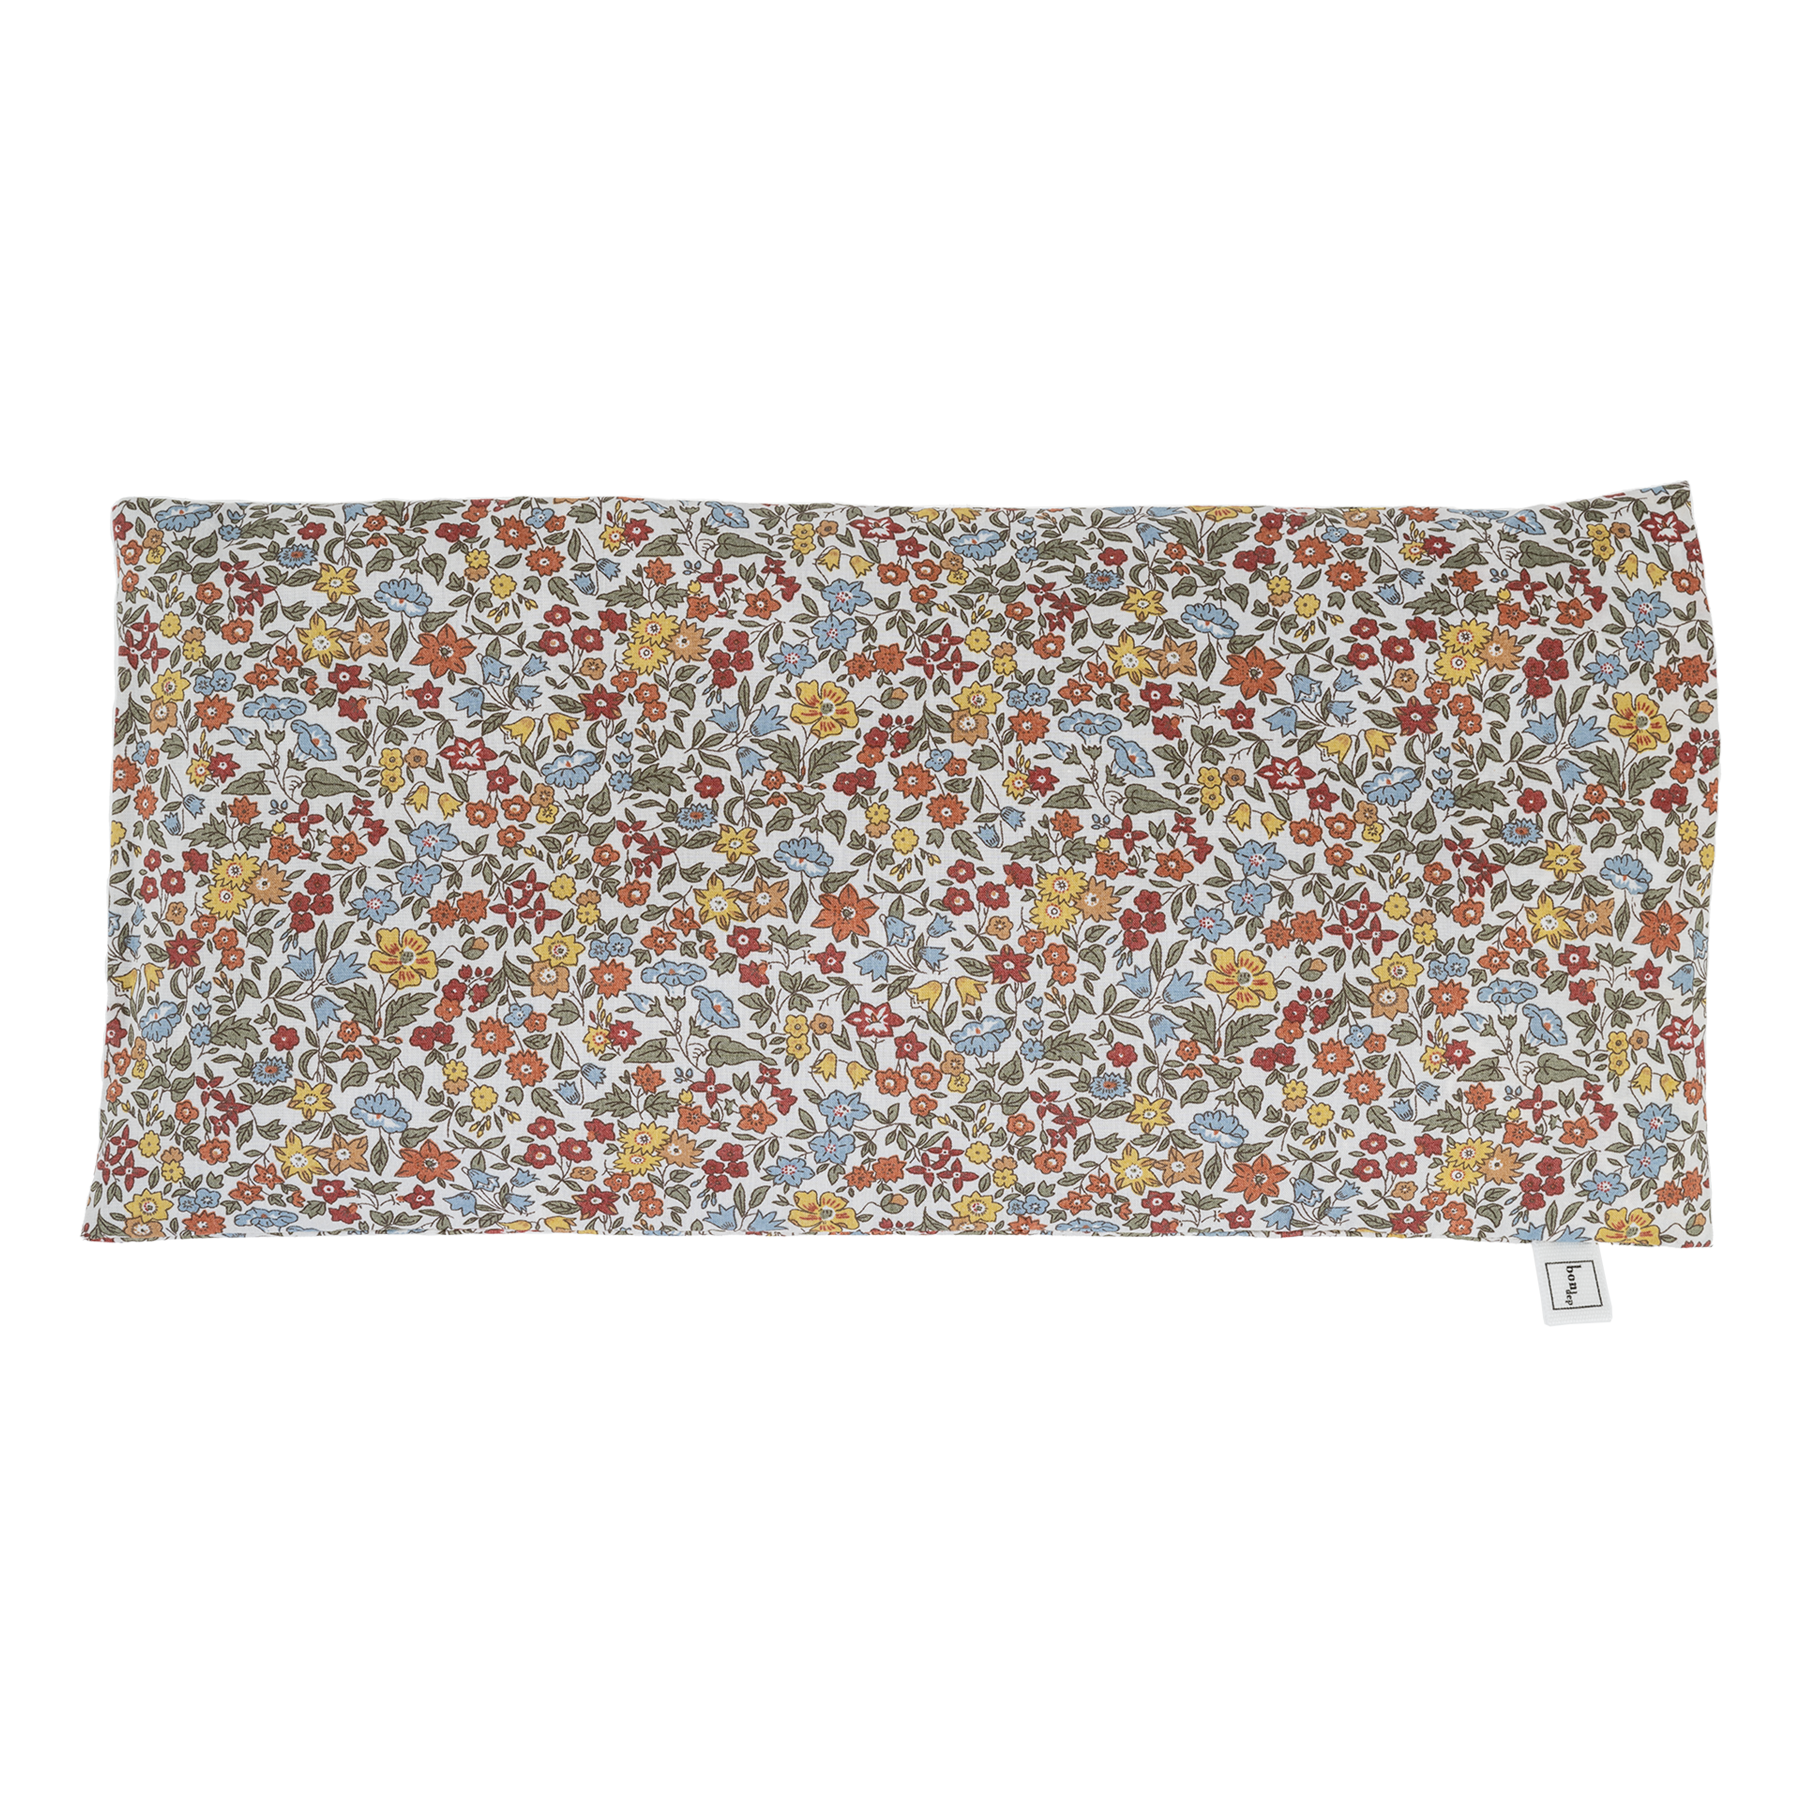 Image of Relaxing Eyepillow mw Liberty Ava from Bon Dep Essentials